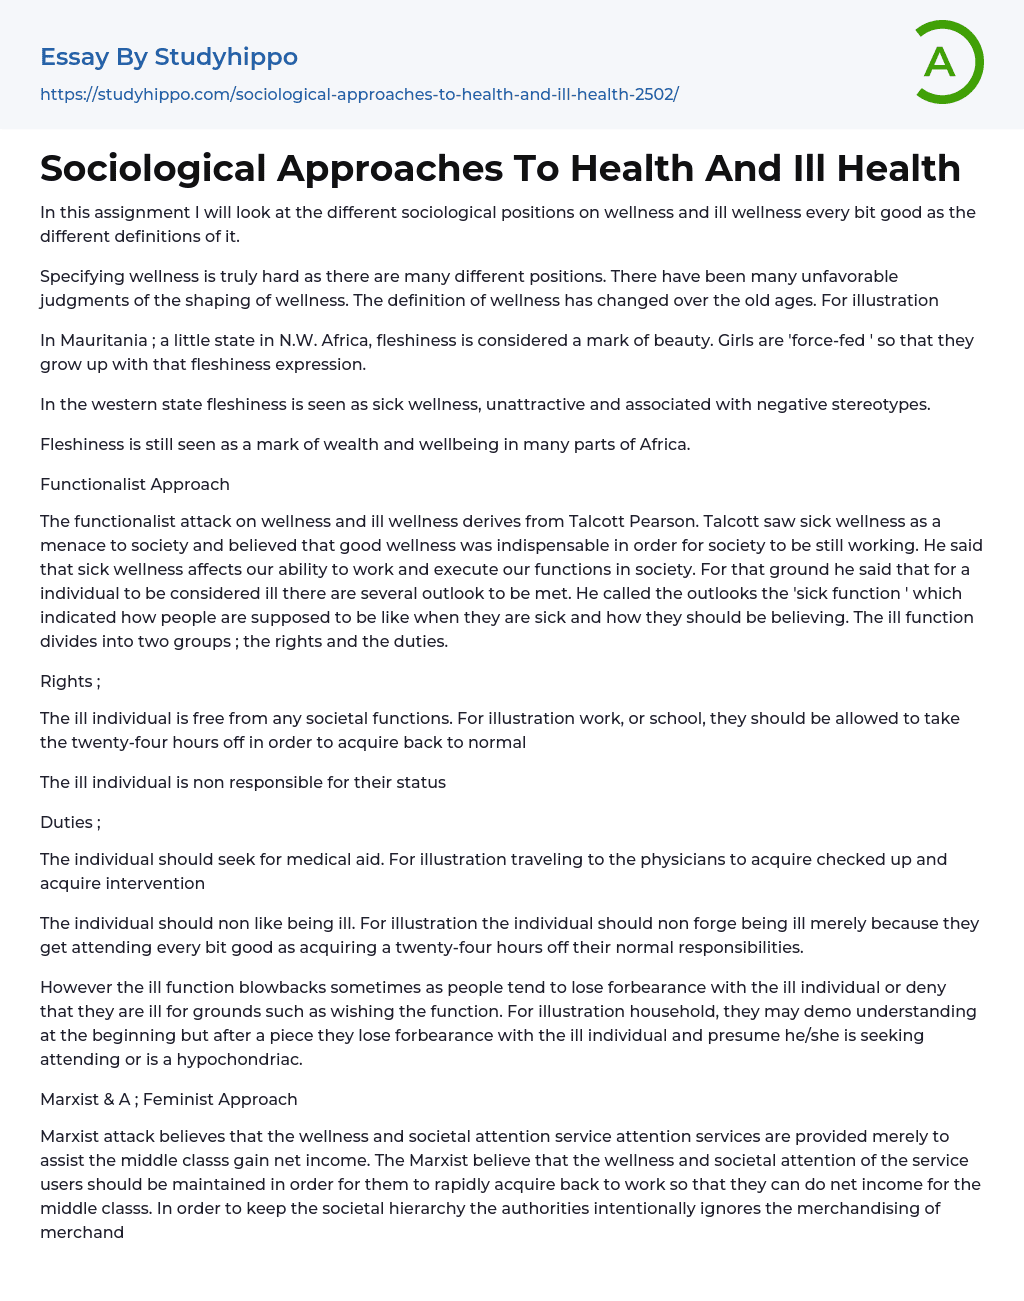 Sociological Approaches To Health And Ill Health Essay Example